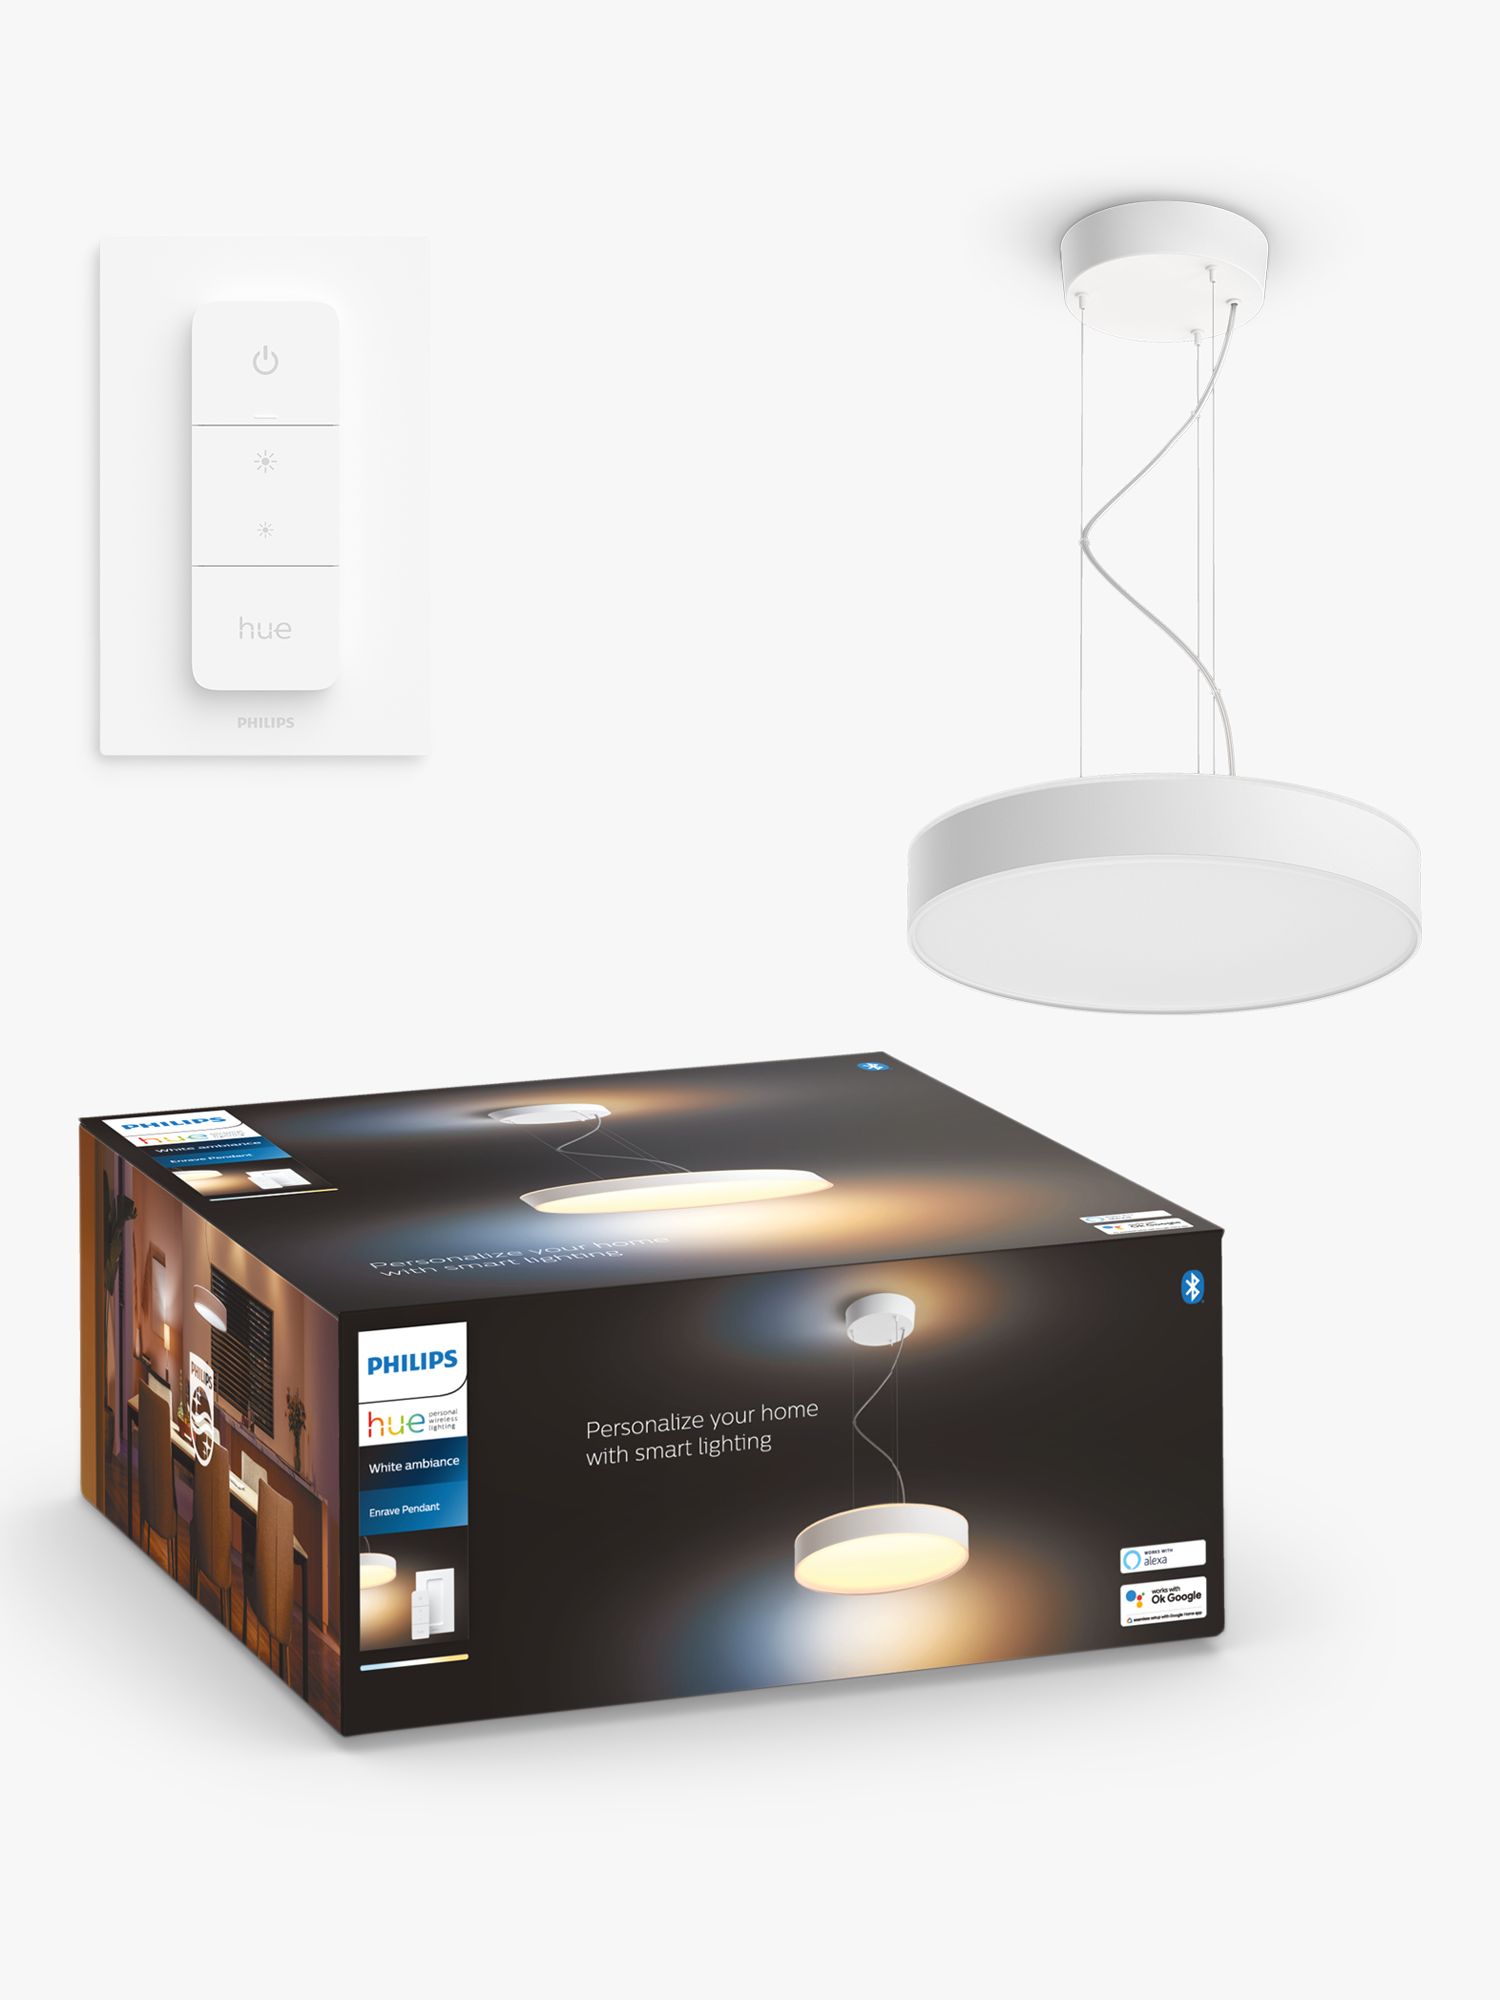 Photo of Philips hue enrave led ceiling light with dimmer switch